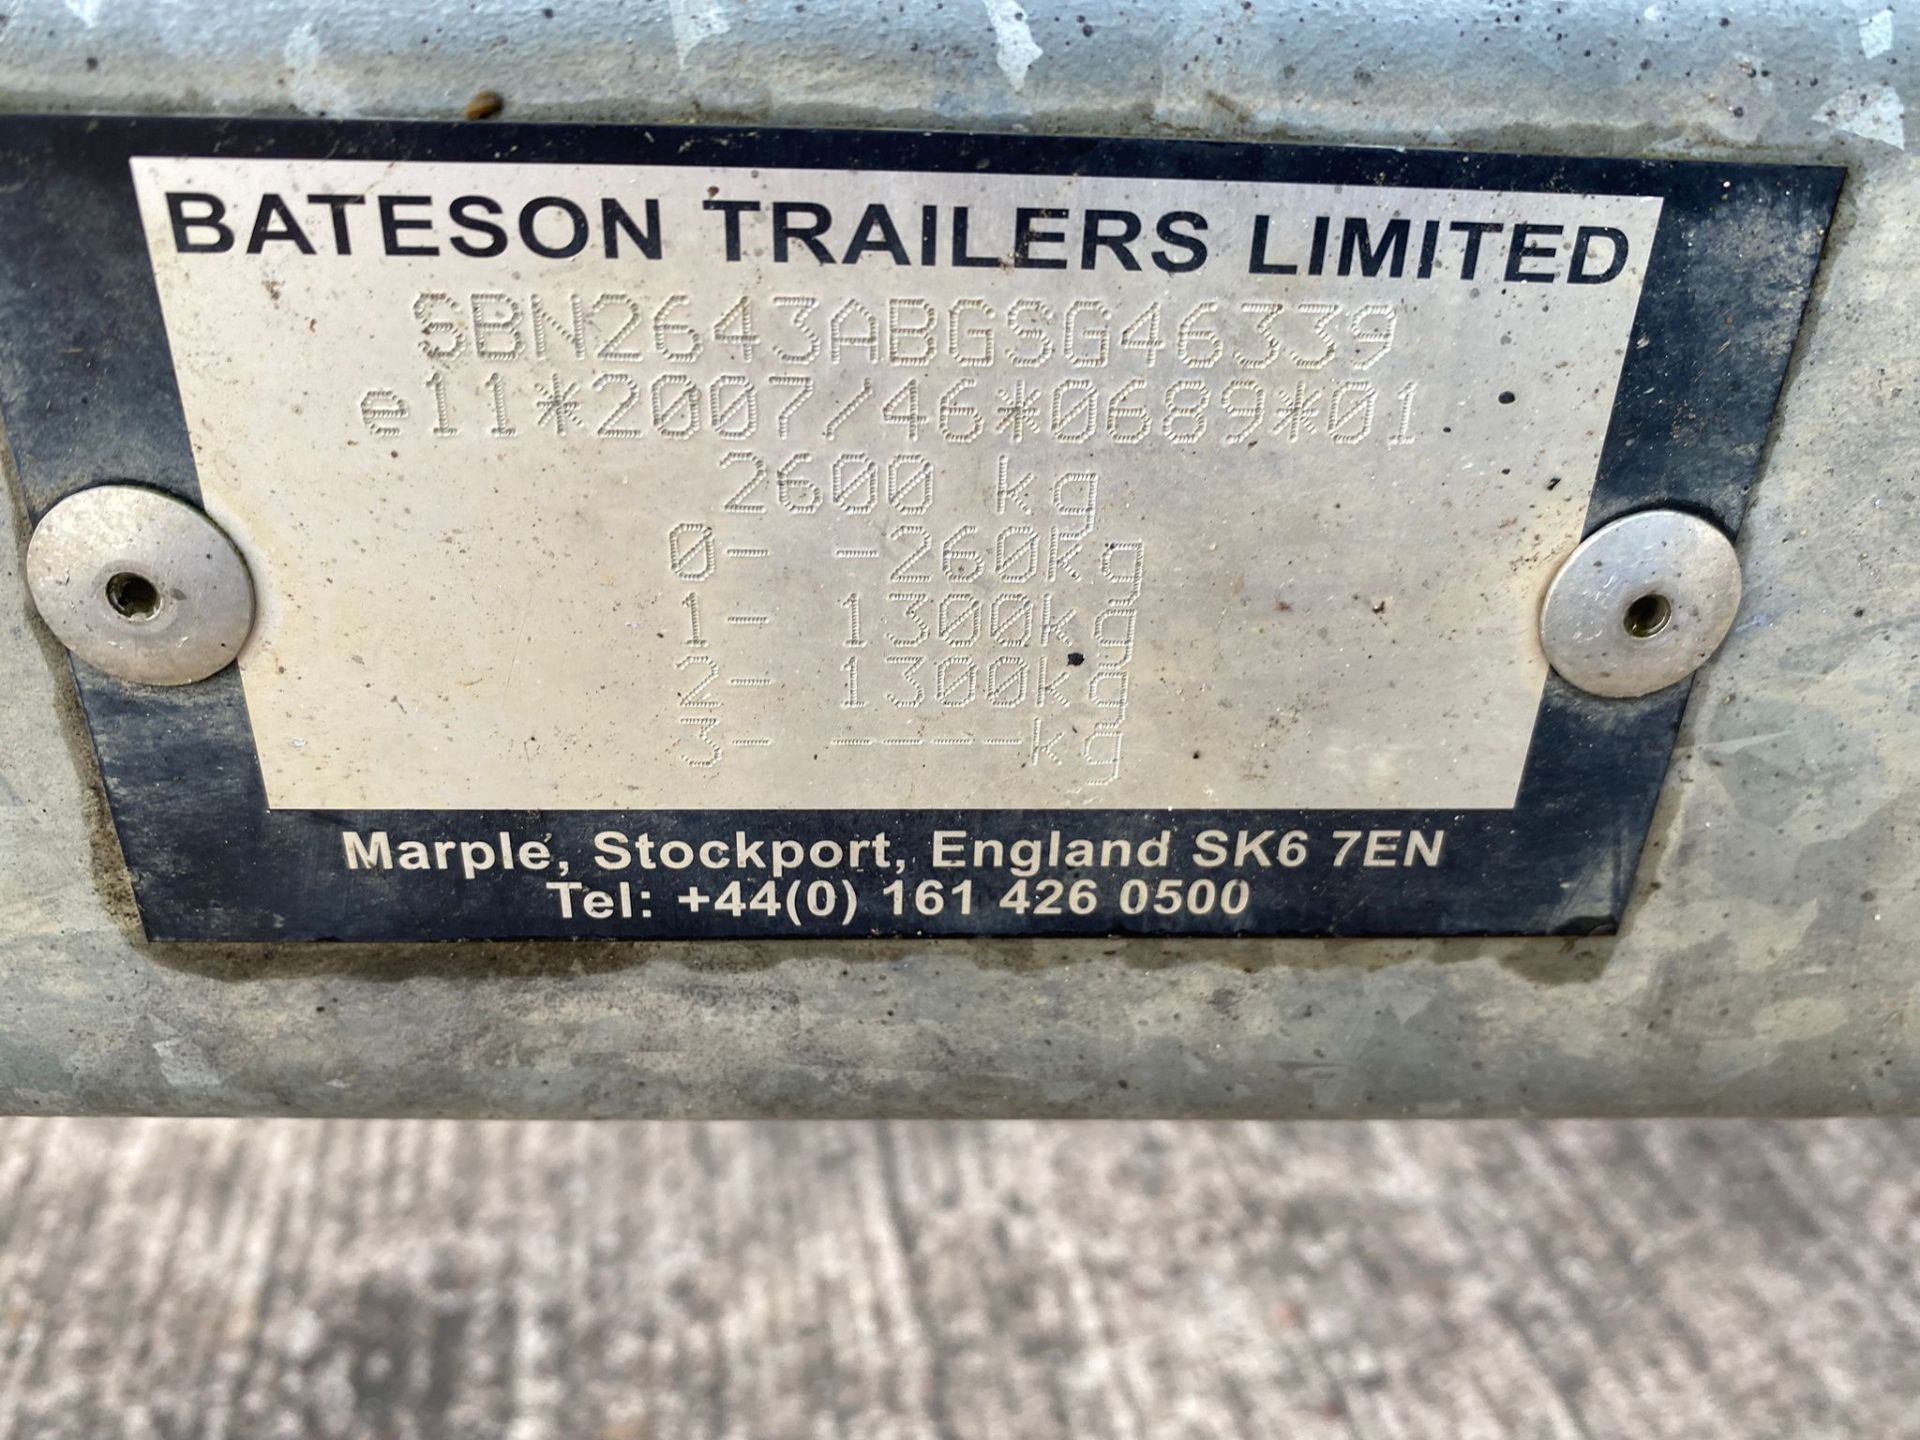 2007 BATESON TRAILER - IN VERY GOOD CONDITION WITH RAMPS, BRAKES ALL WORK, LIGHTS ALL WORK - Image 3 of 11